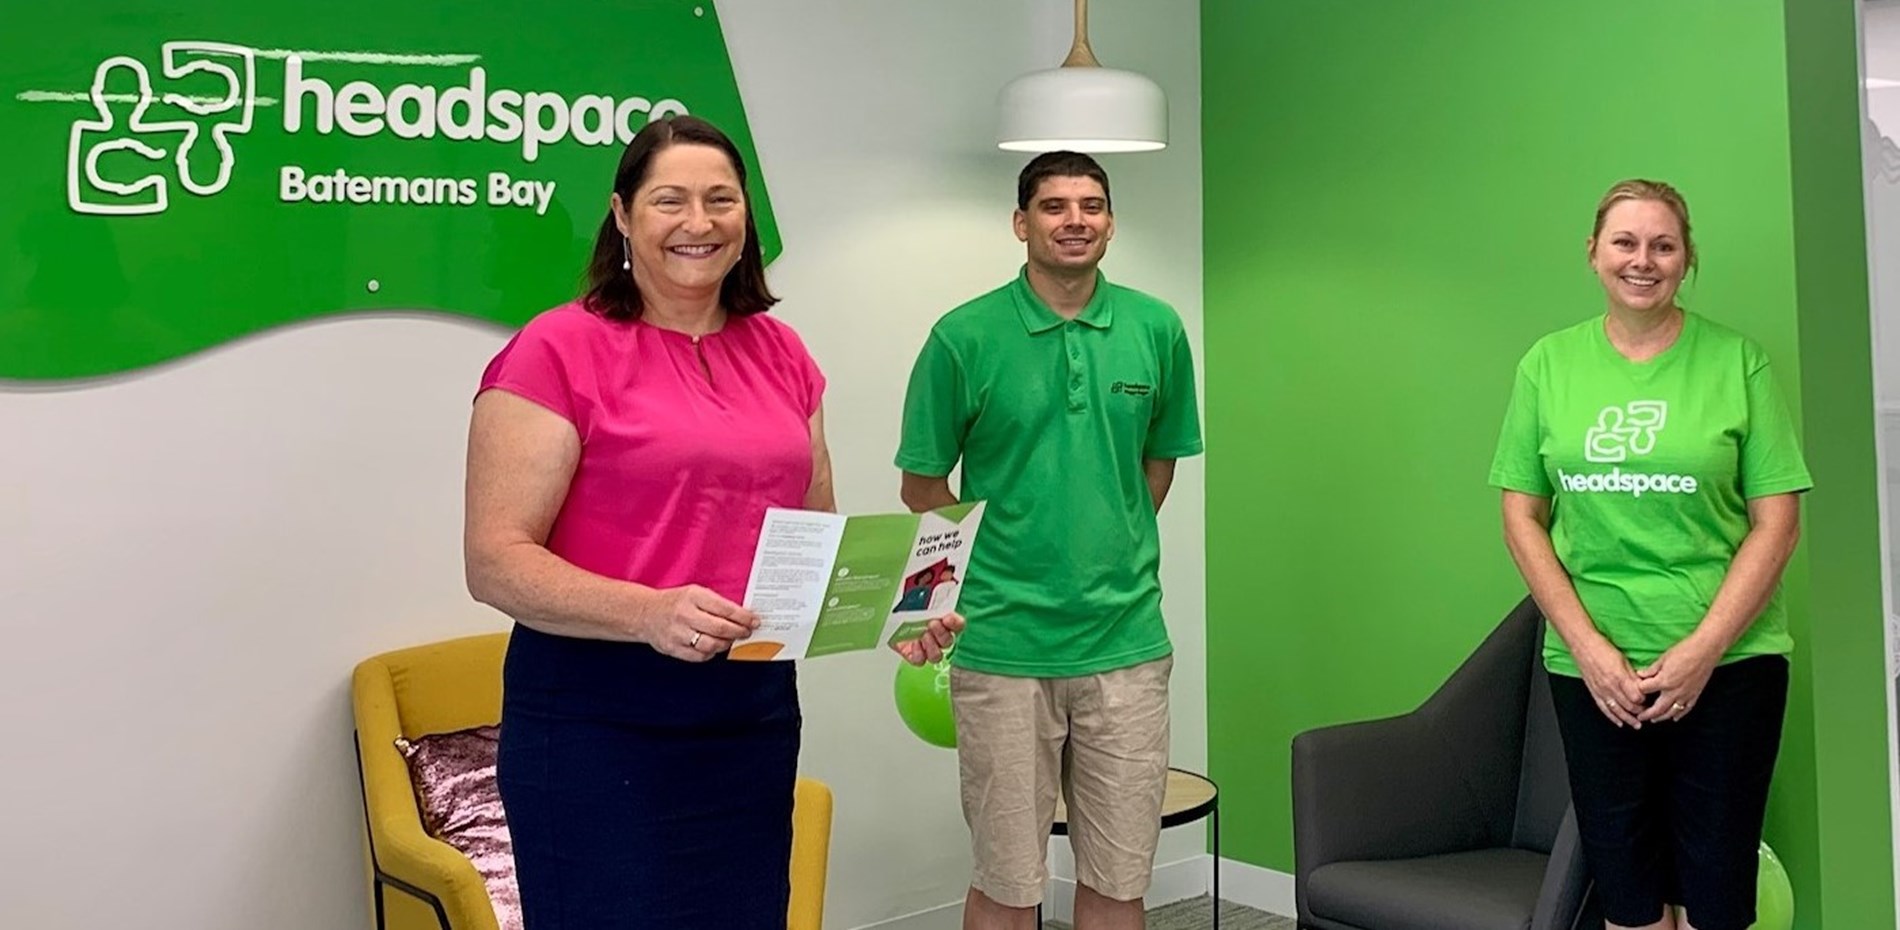 Media release: Big win for Batemans Bay community as permanent headspace opens Main Image